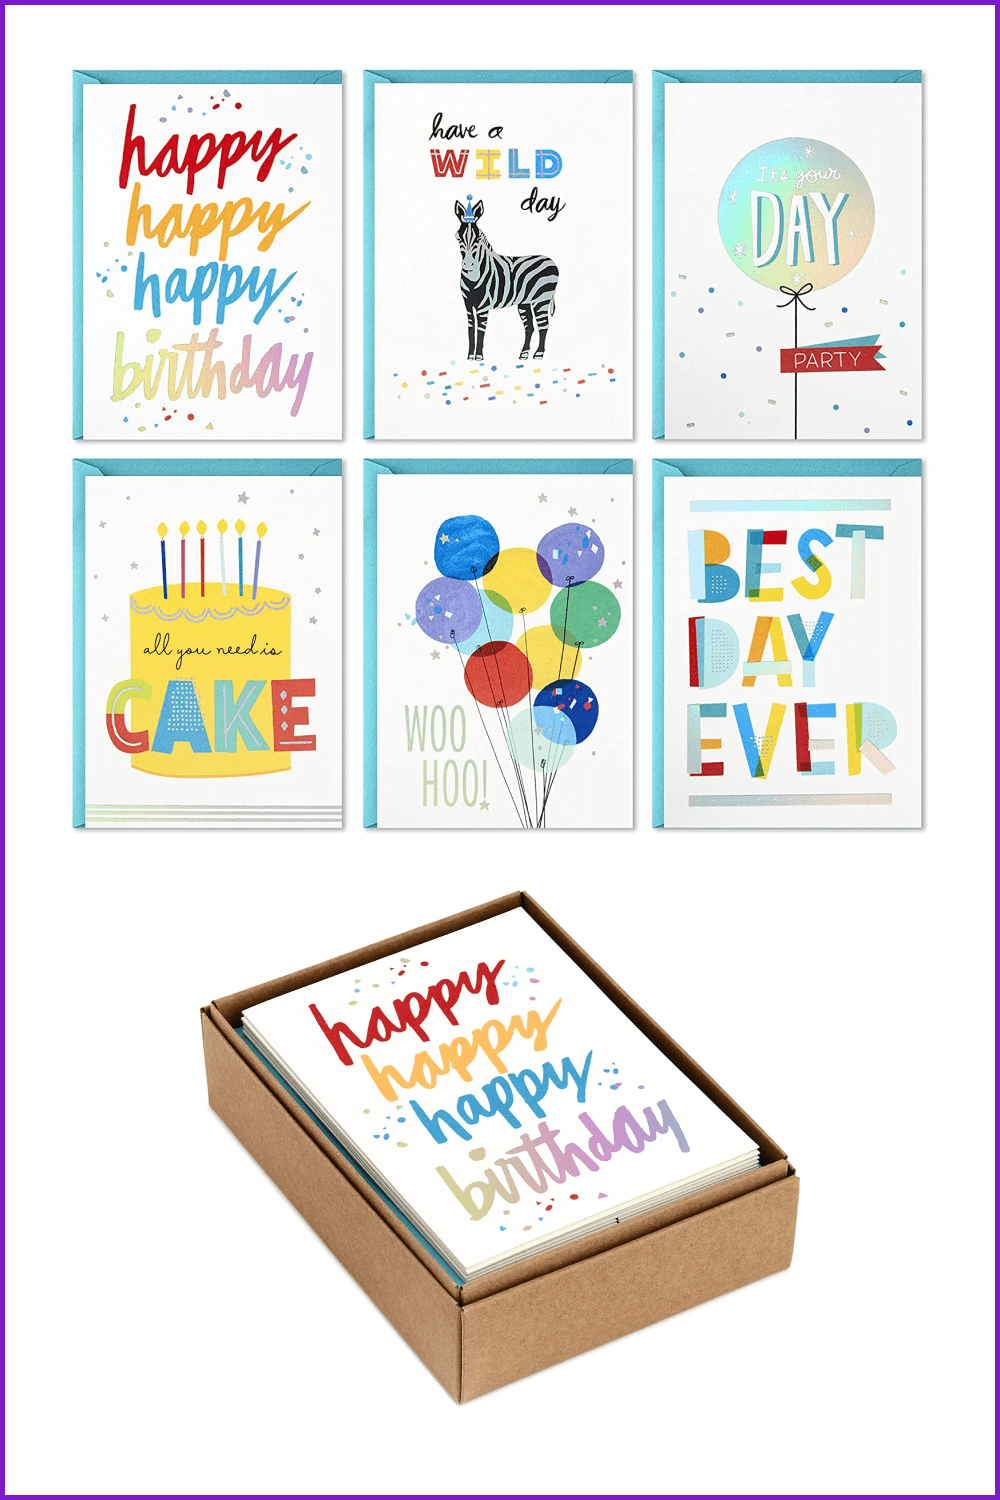 Collage of birthday cards with painted cakes, balloons and colorful inscriptions.